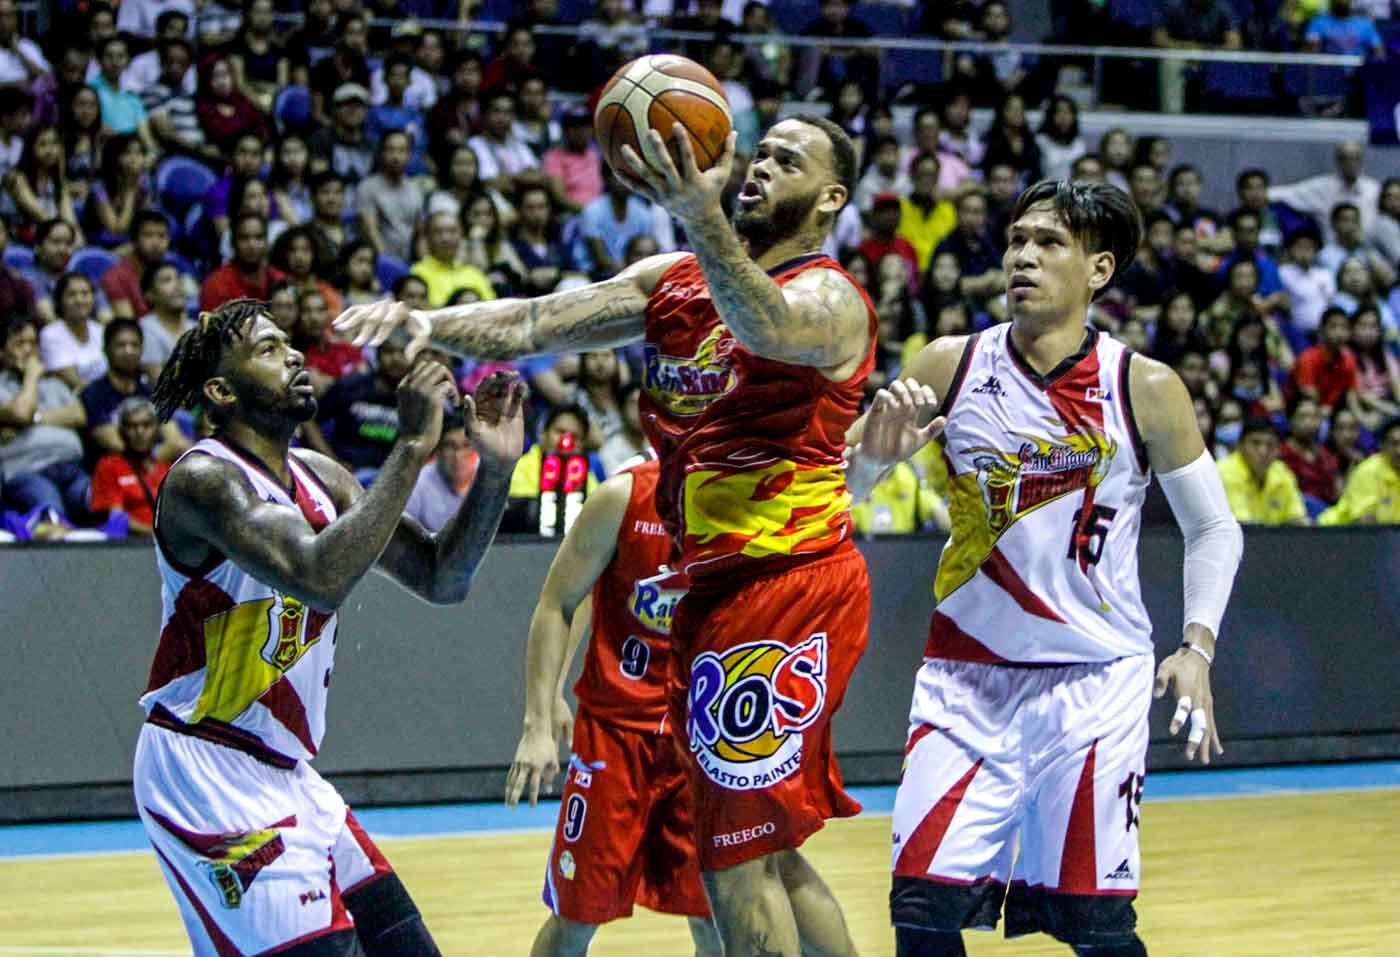 Rain or Shine barely escapes San Miguel to go up 2-0 in PBA semis